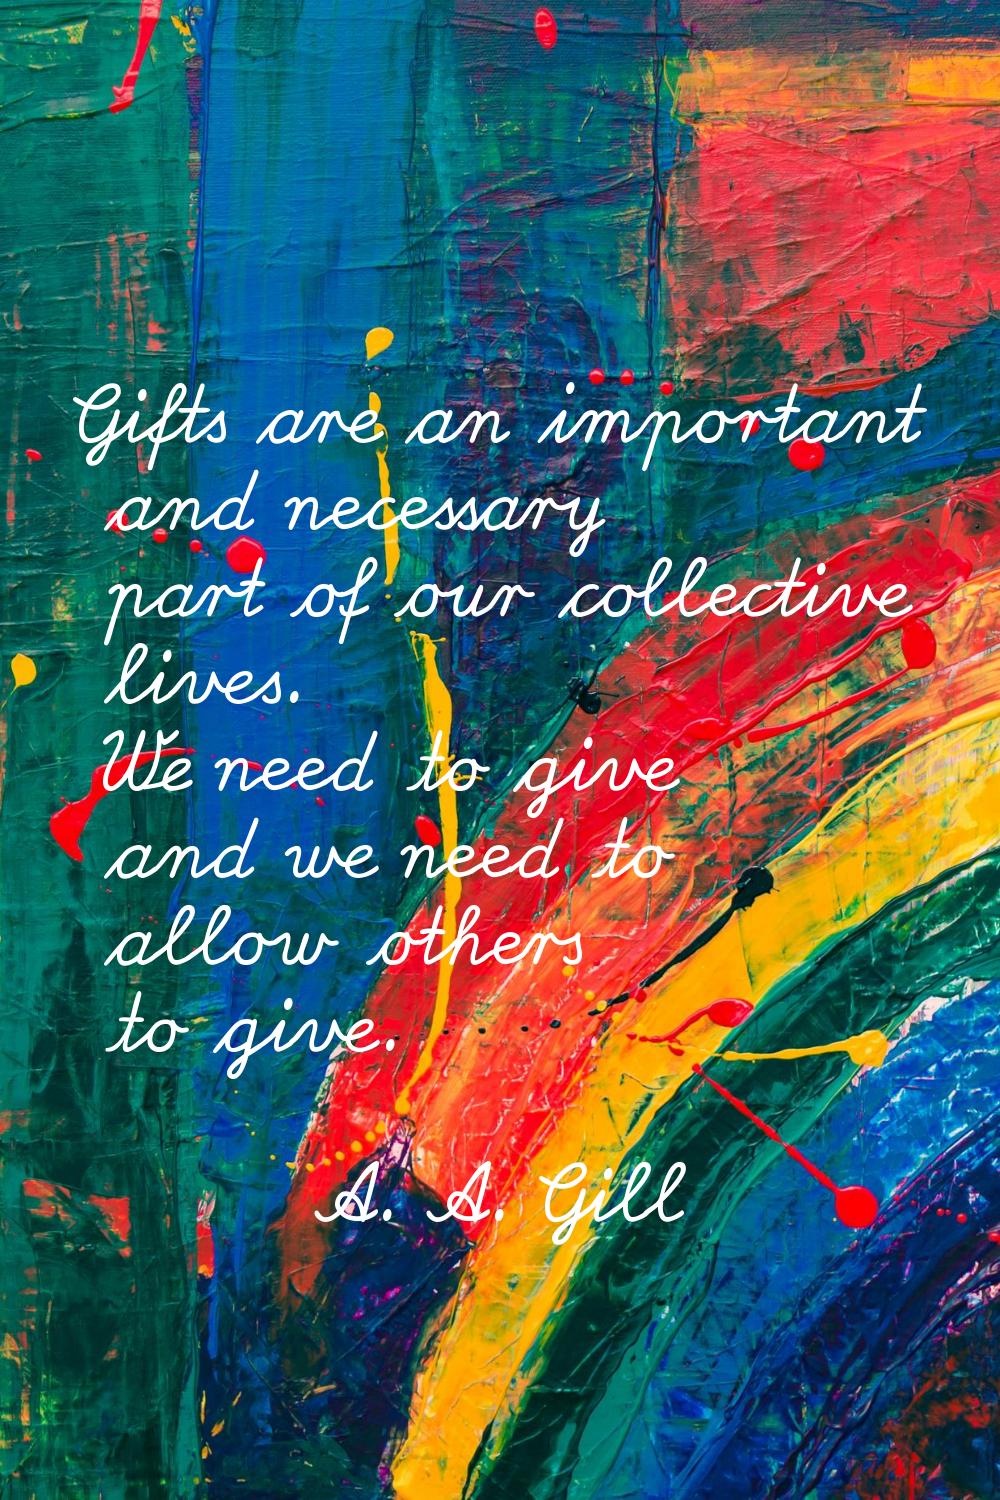 Gifts are an important and necessary part of our collective lives. We need to give and we need to a